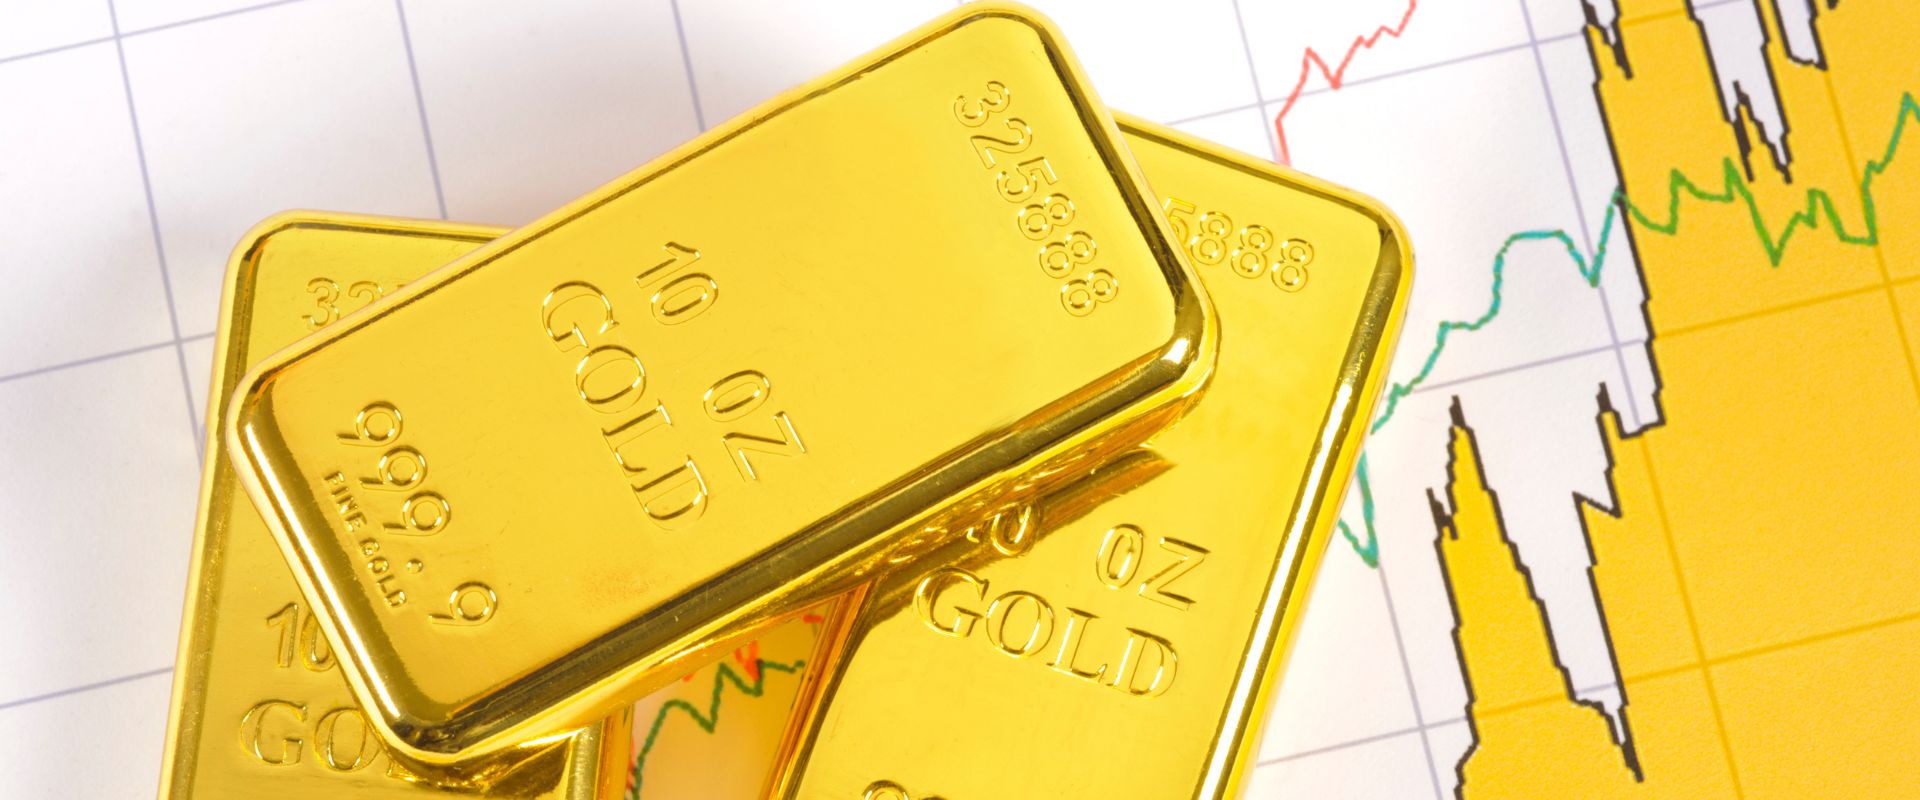 three gold bars weighing ten ounces each on gold price chart